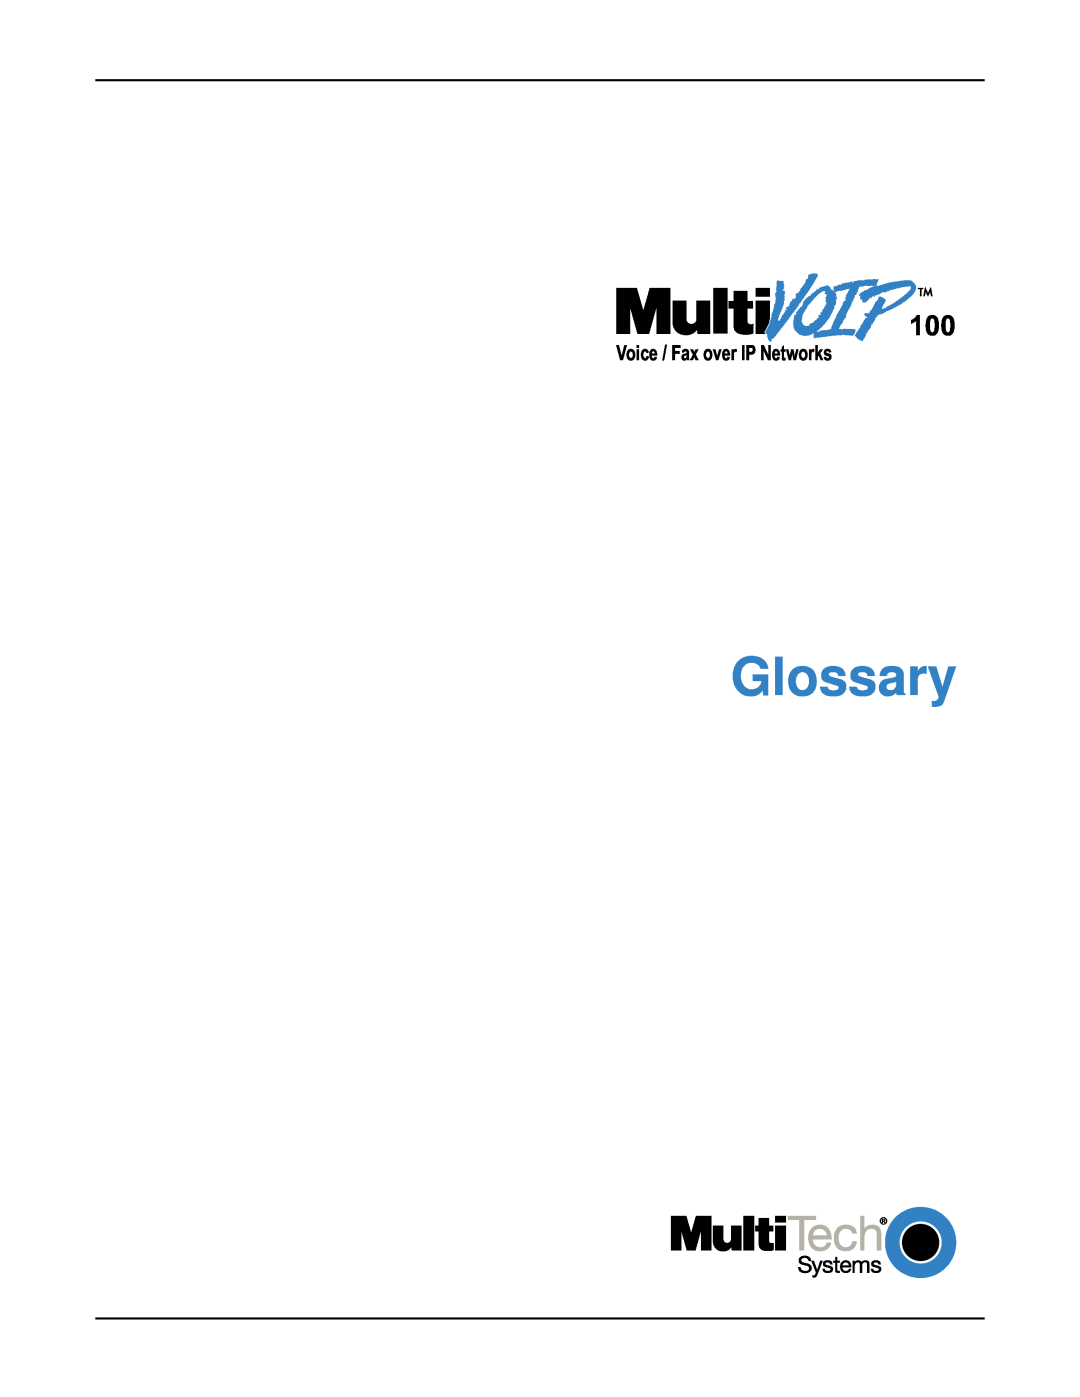 Multi-Tech Systems MVP120 manual Glossary, Voice / Fax over IP Networks 